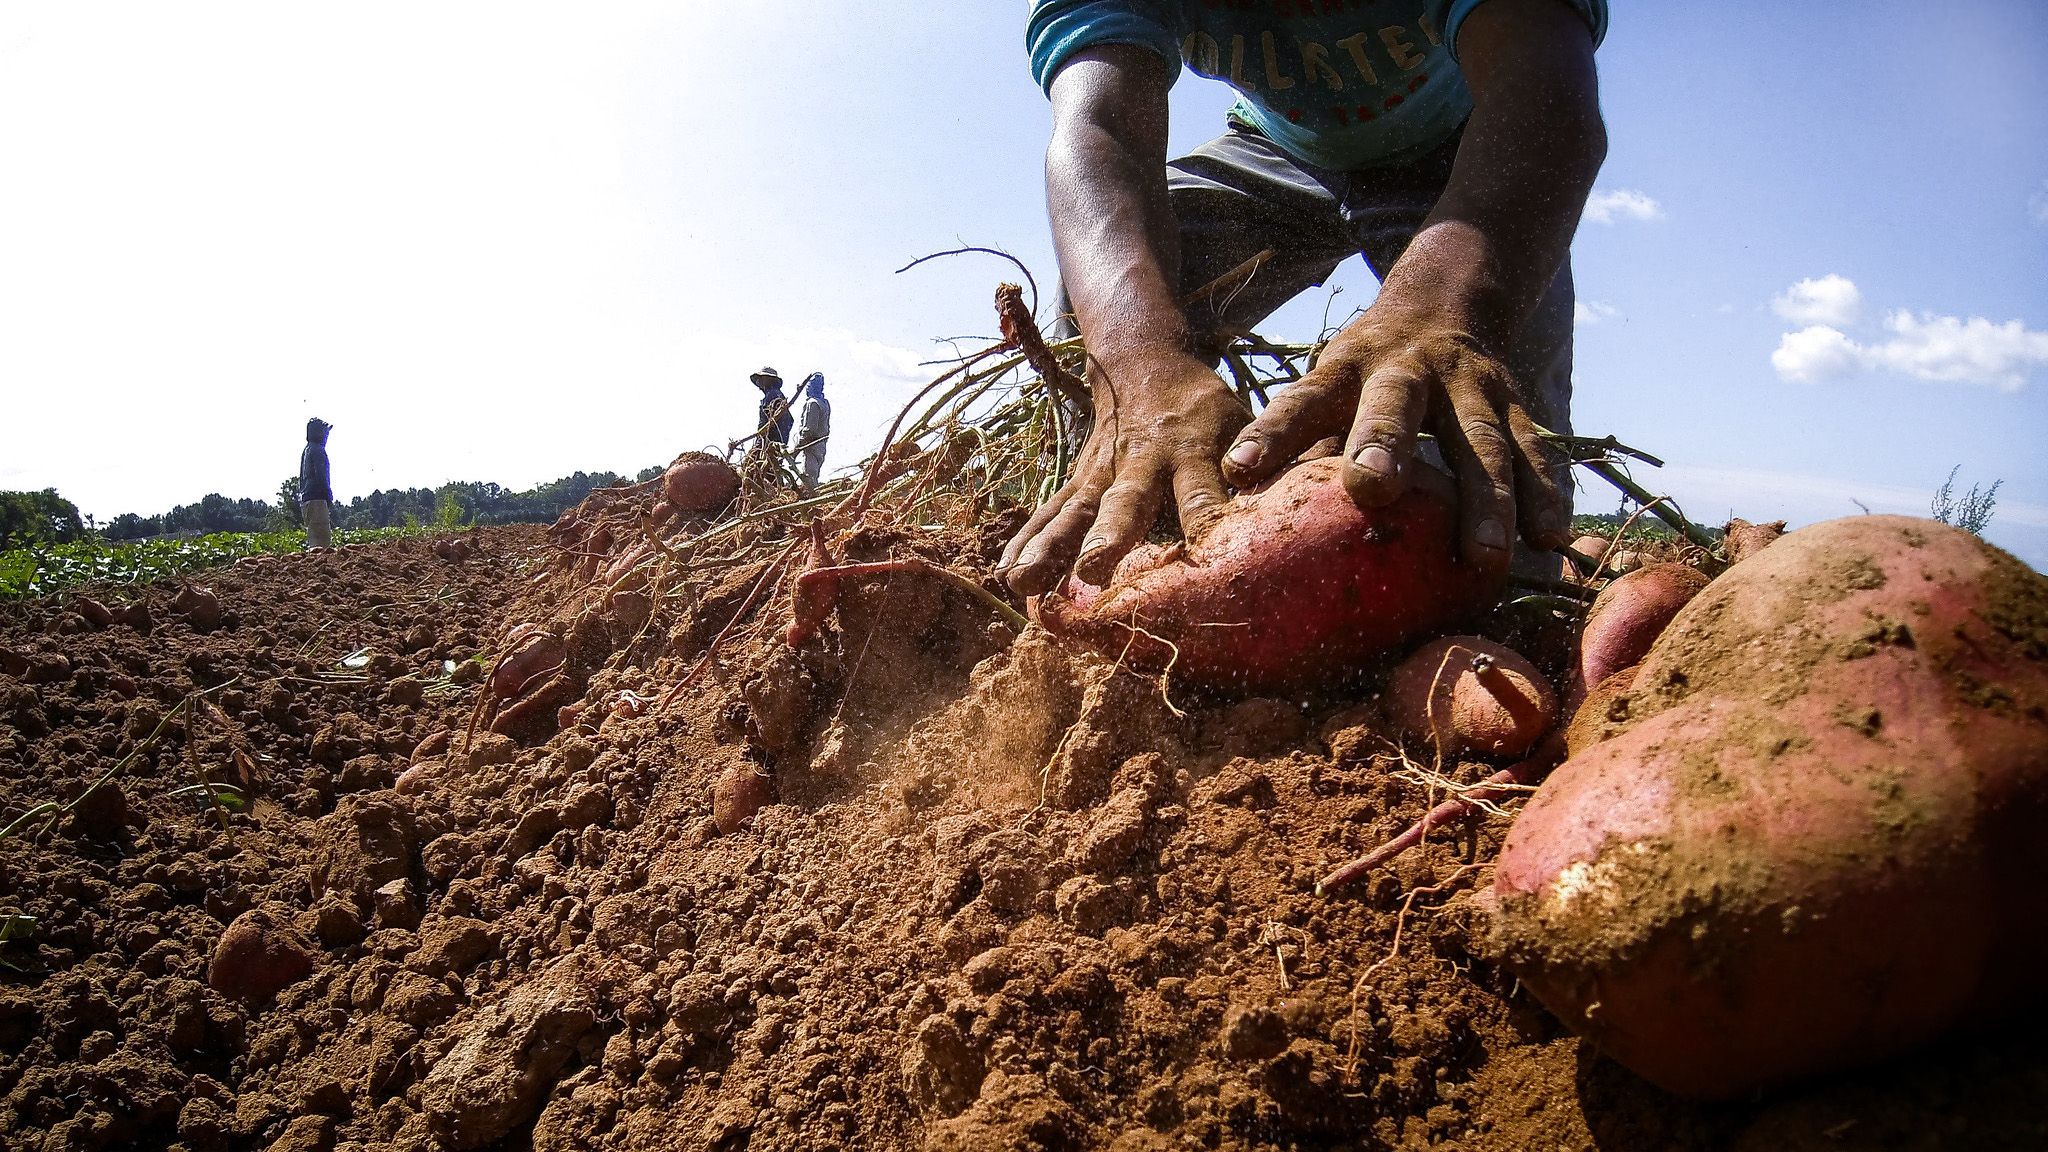 Hands digging sweet potatoes from the ground, with other workers standing on the horizon